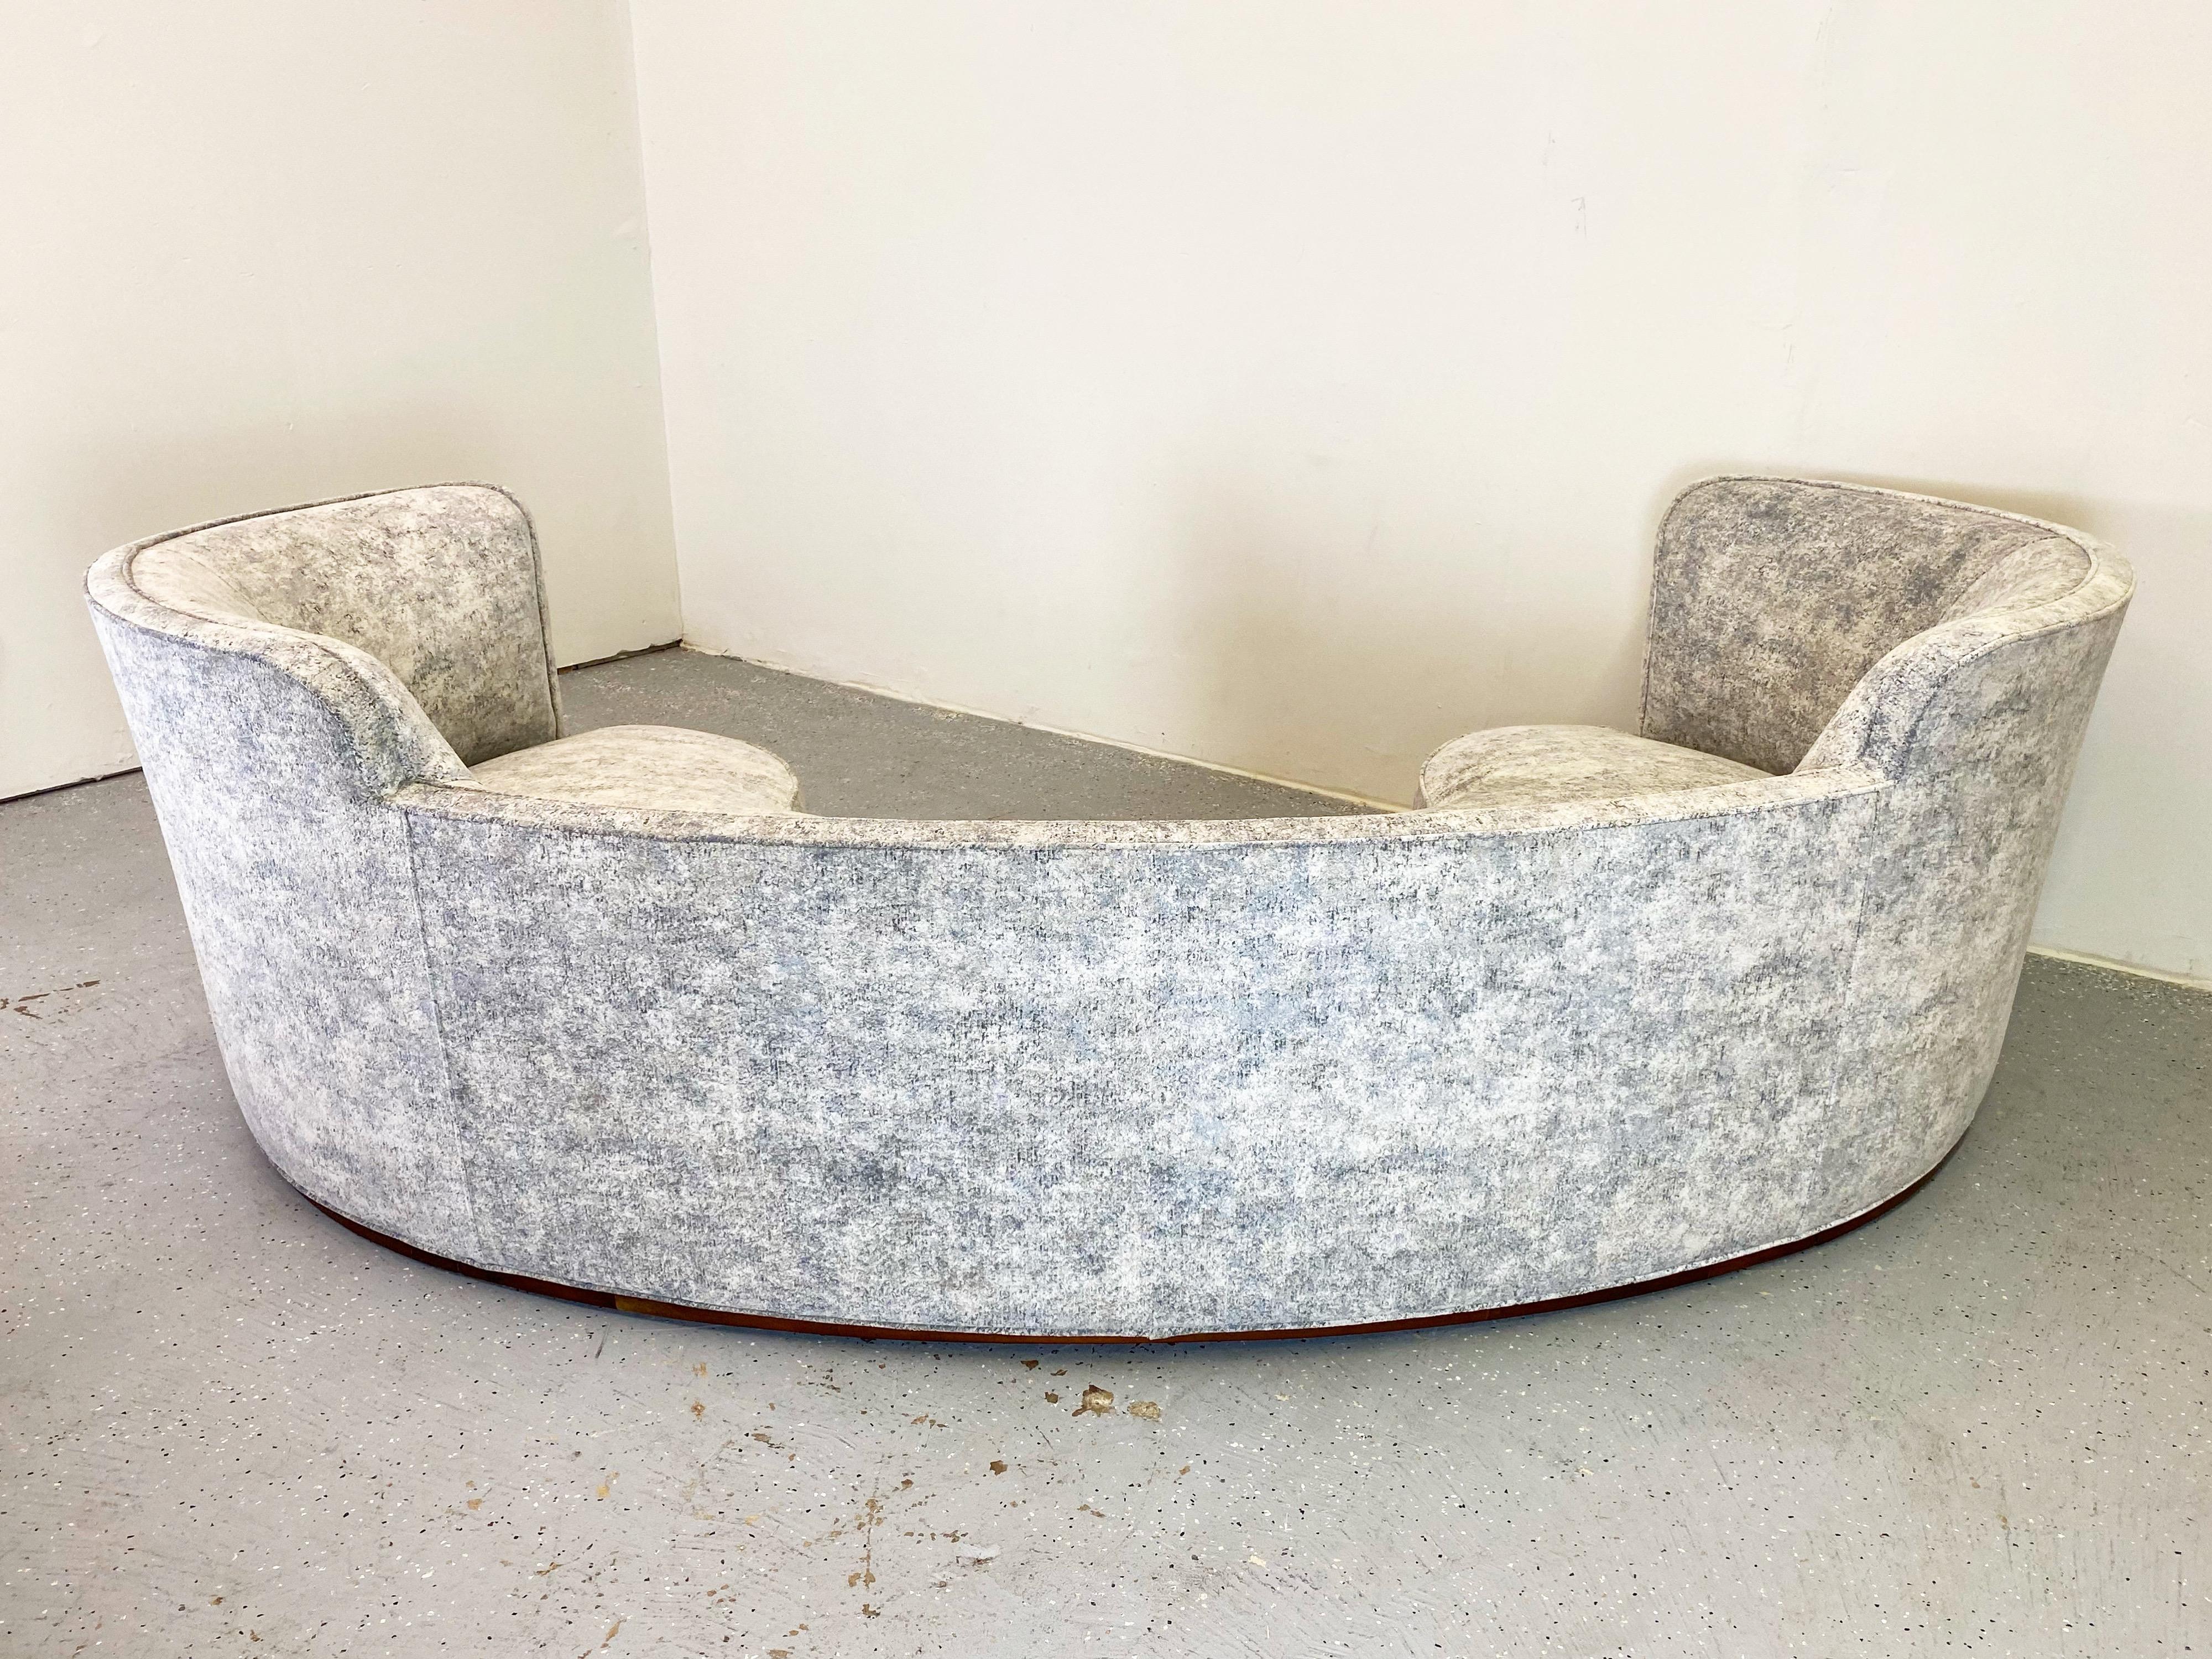 This sofa is an excellent example of modern elegance. An extraordinary substantial piece fully restored and sitting lightly on a recessed walnut base. The new upholstery is soft and sturdy and shows a beautiful blend of light blue, grey, and white.